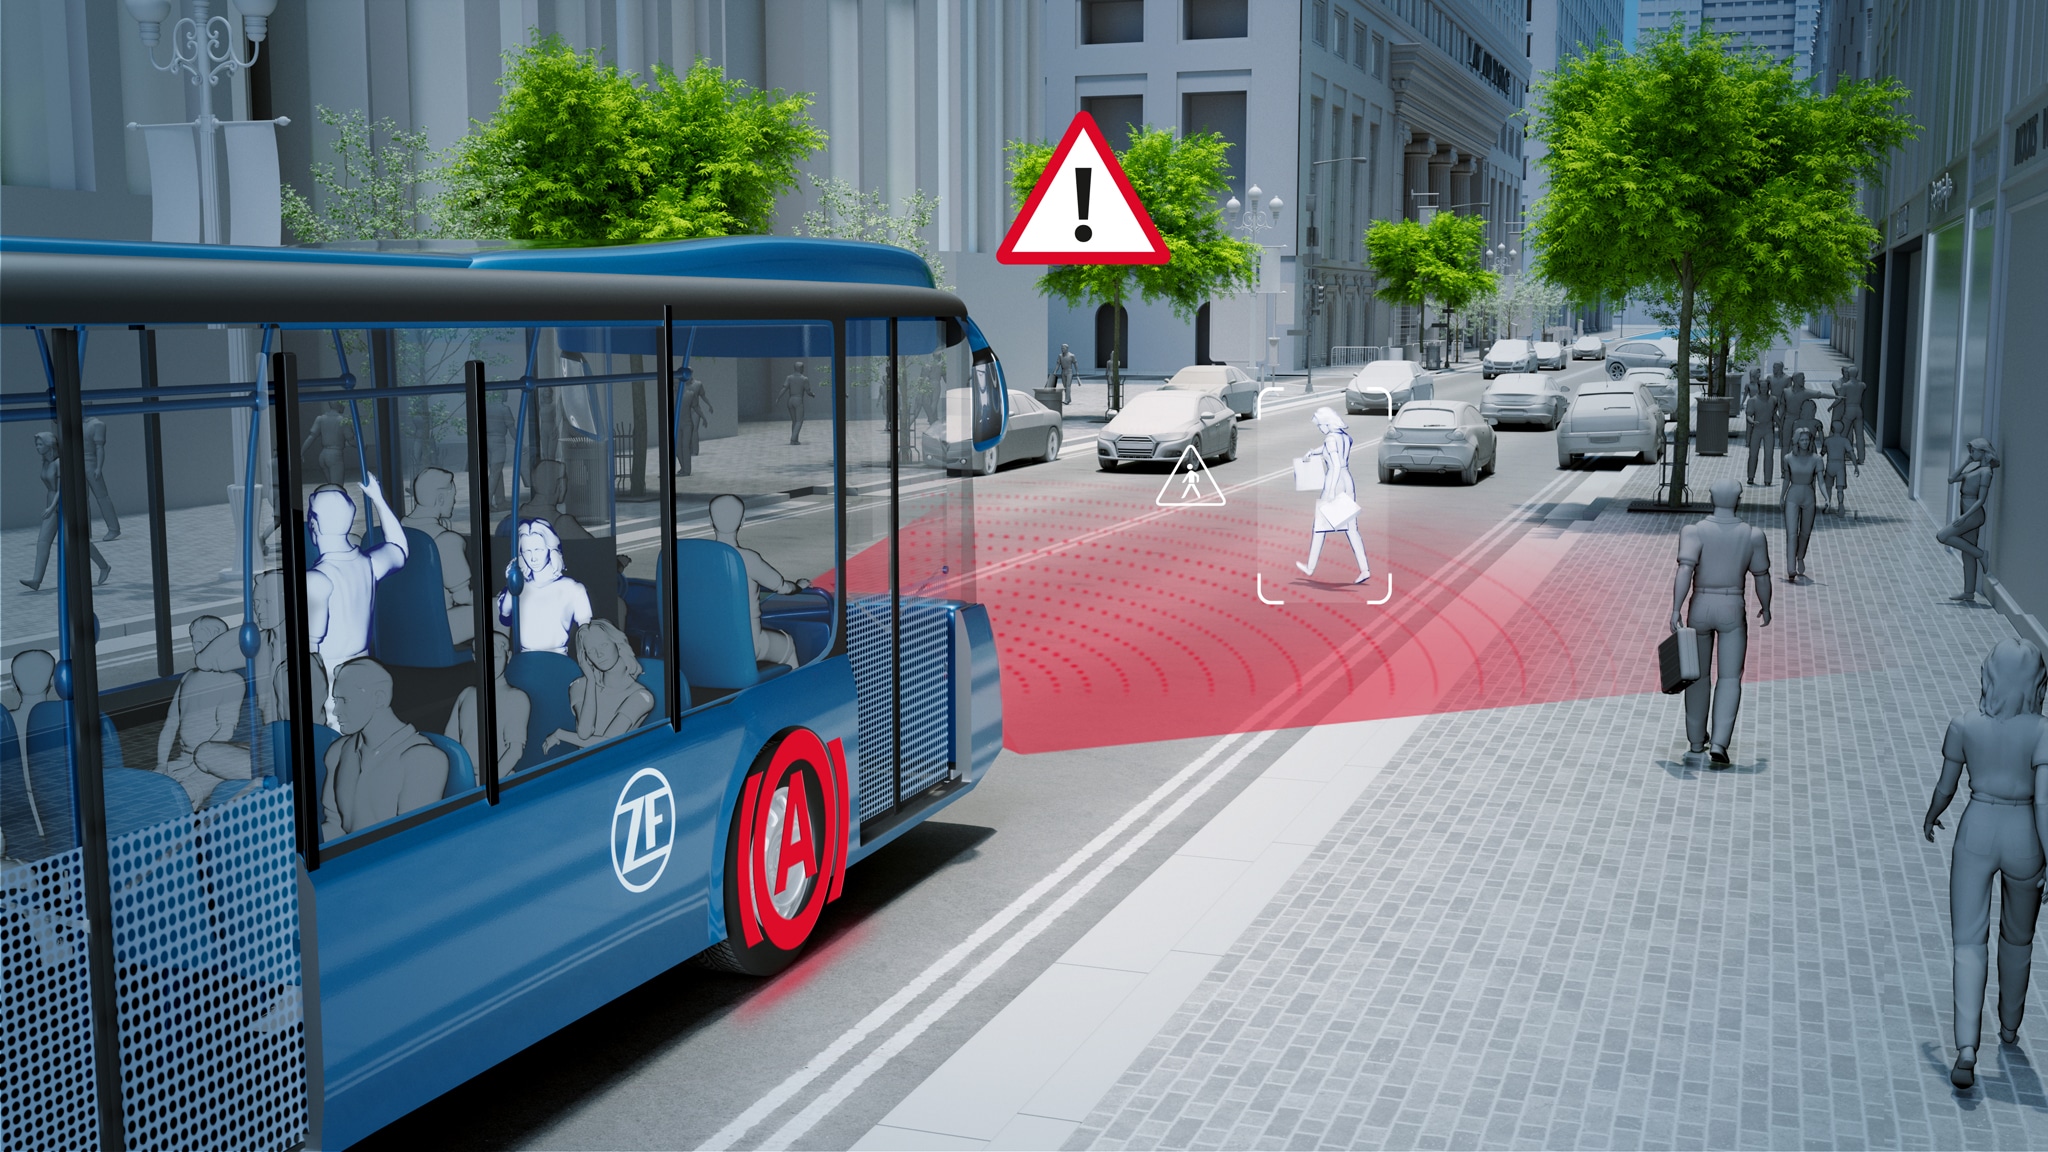 ZF announced a new City Mitigation System for buses